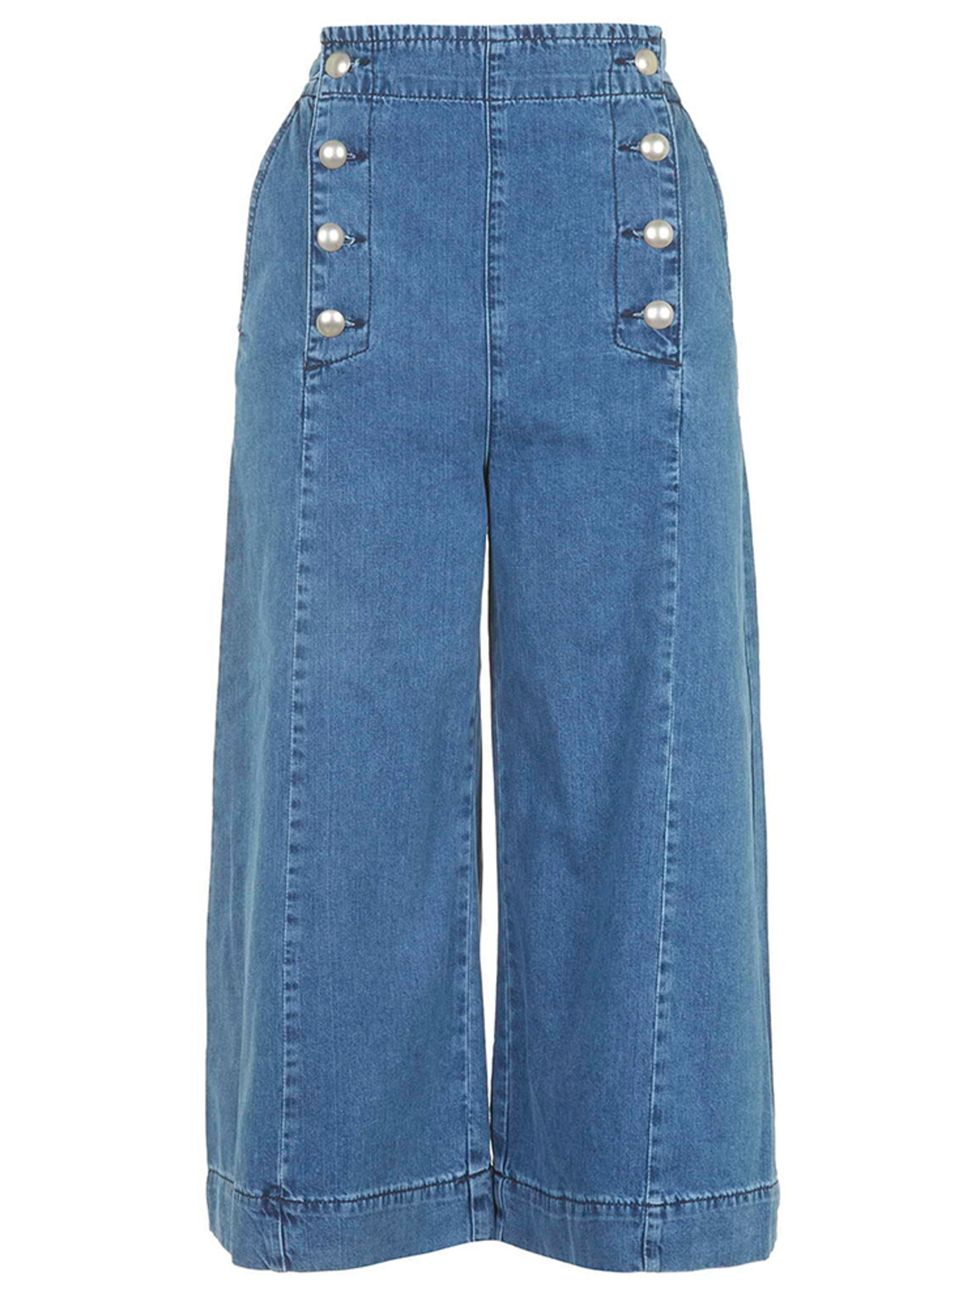 <p>Don&rsquo;t let your trousers dangle in muddy puddles, go all Gucci with these denim cut offs. <a href="http://www.topshop.com/webapp/wcs/stores/servlet/ProductDisplay?Ntt=culottes&amp;storeId=12556&amp;productId=20280913&amp;urlRequestType=Base&amp;ca